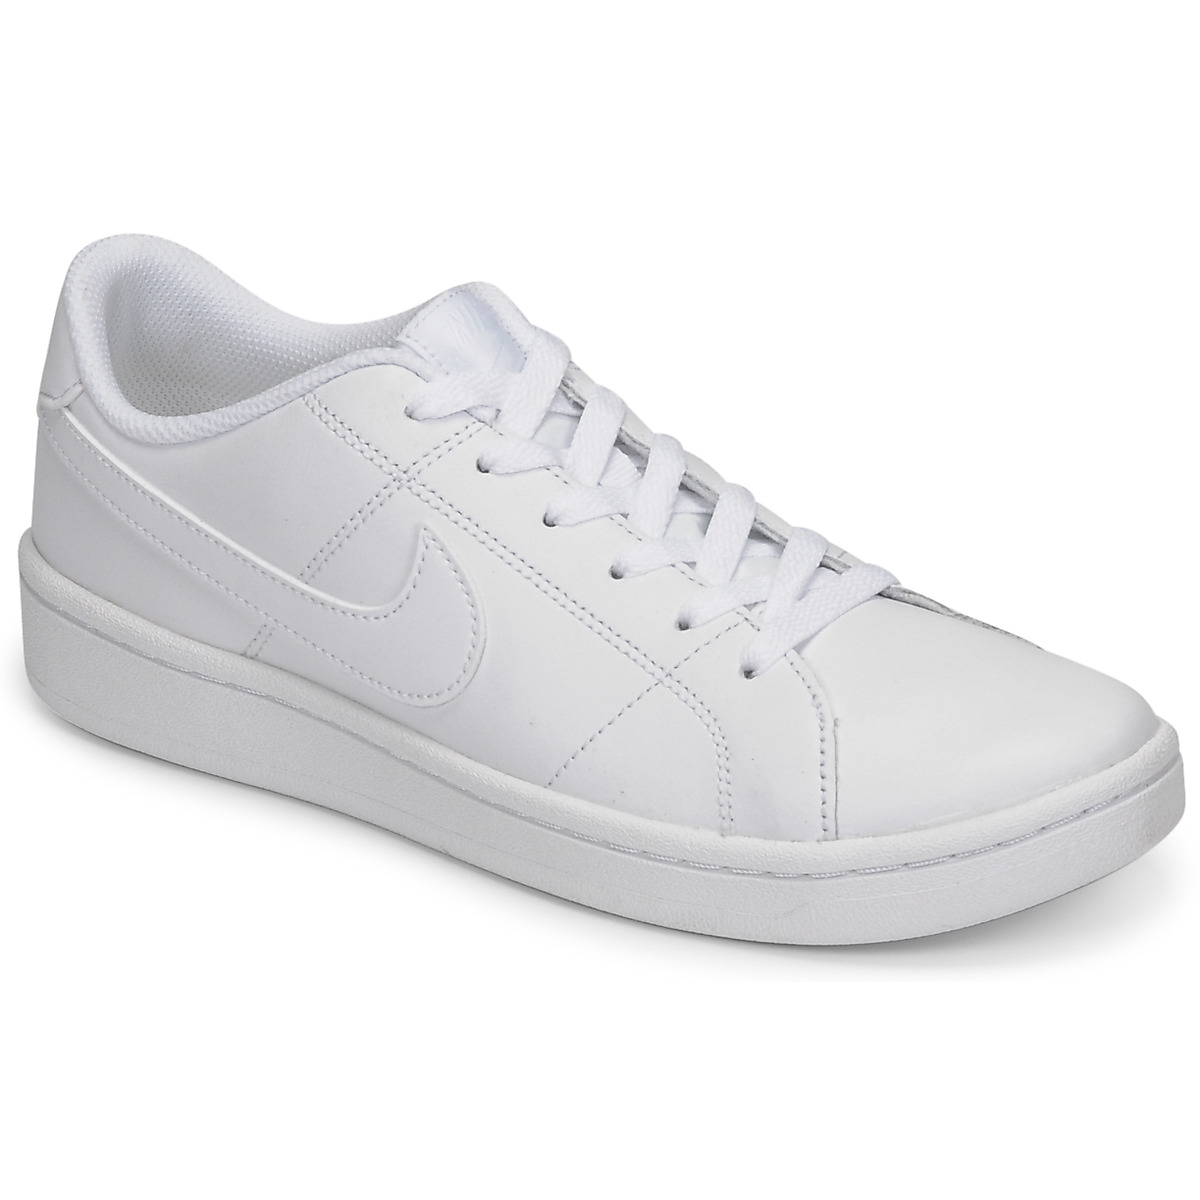 GREAT - The Royale WHITE LEATHER size 38